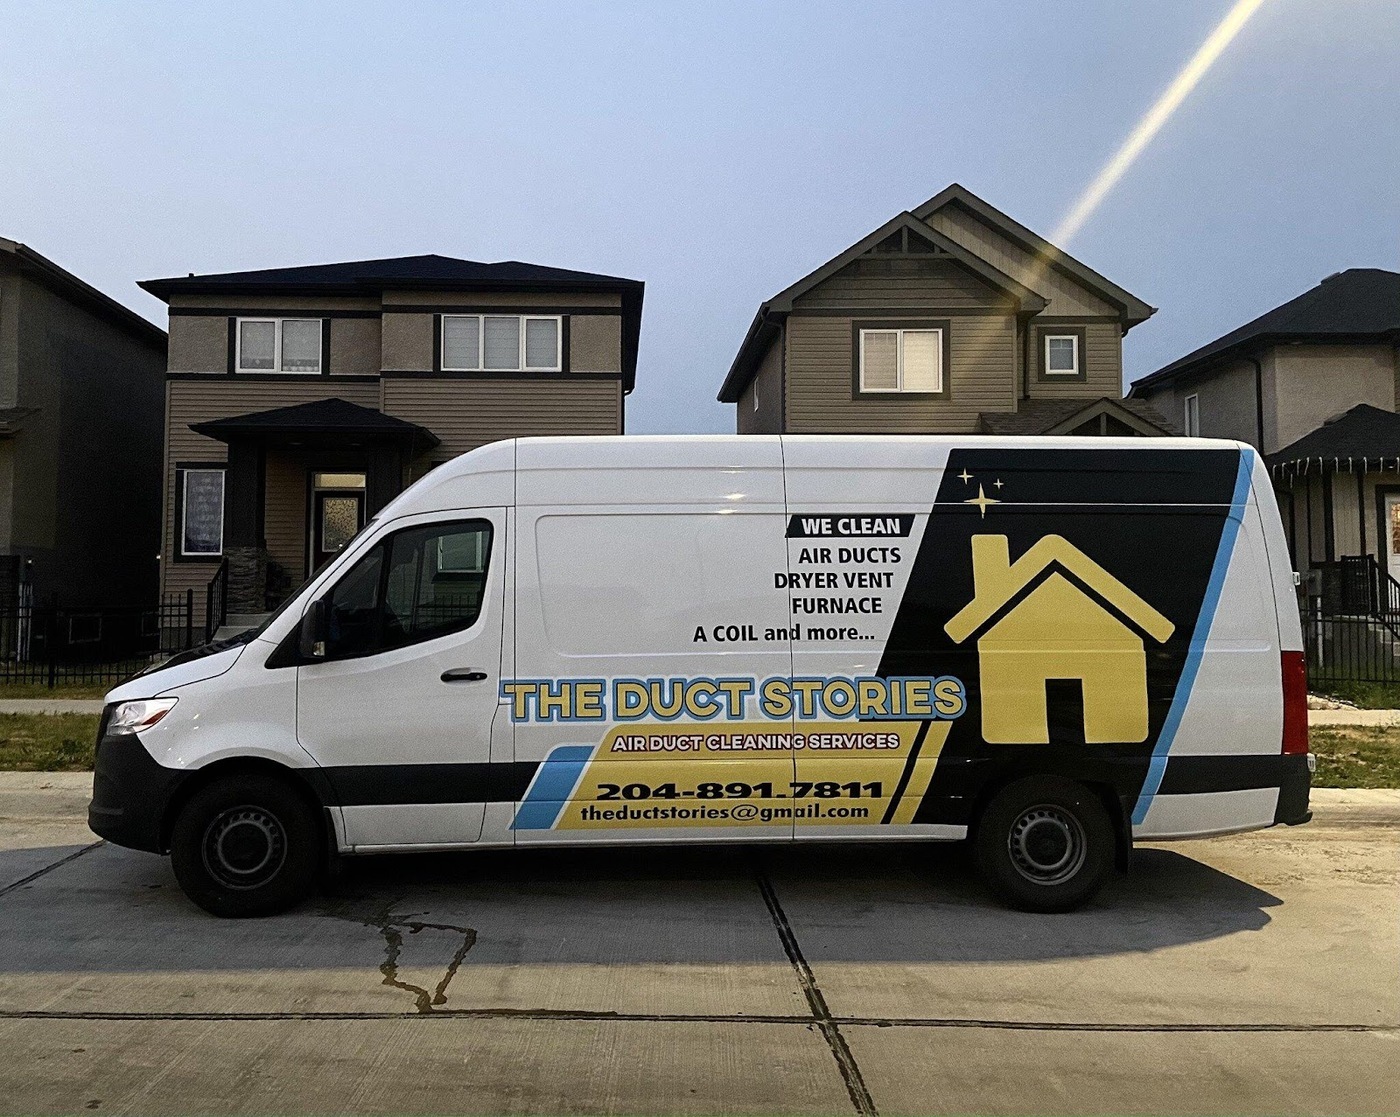 The Duct Stories Air Duct Cleaning Service Winnipeg offers residential and commercial duct cleaning in Winnipeg, furnace cleaning in Winnipeg and dryer vent cleaning in Winnipeg, Canada.